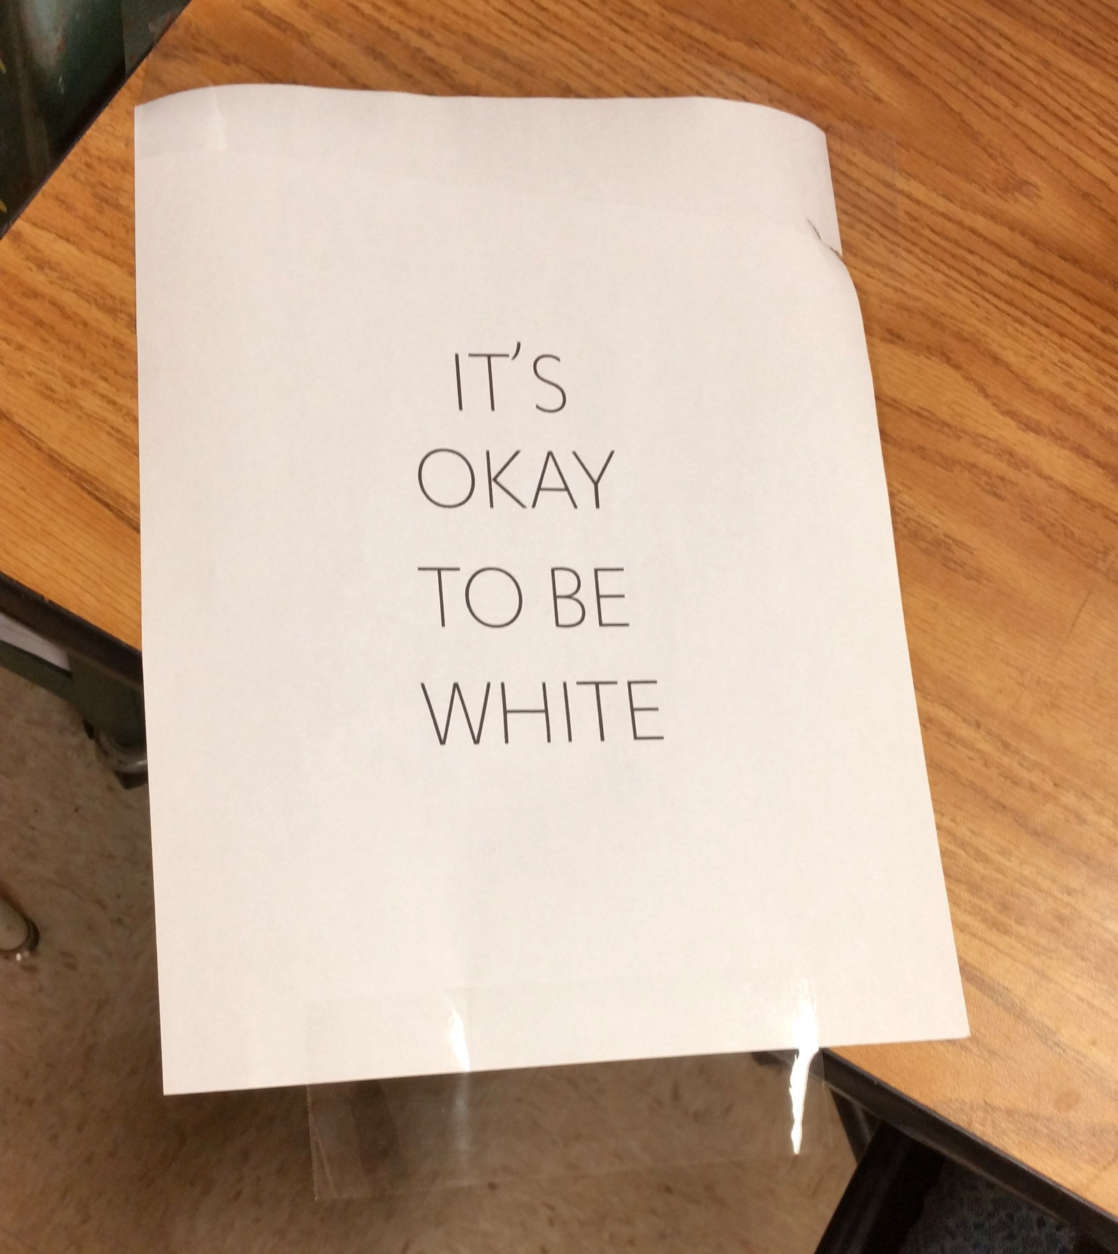 This image provided by Mongomery County Public Schools shows one of the fliers found at Montgomery Blair High School on Wednesday morning. School officials said they are investigating who posted the fliers. (Courtesy Montgomery County Public Schools)